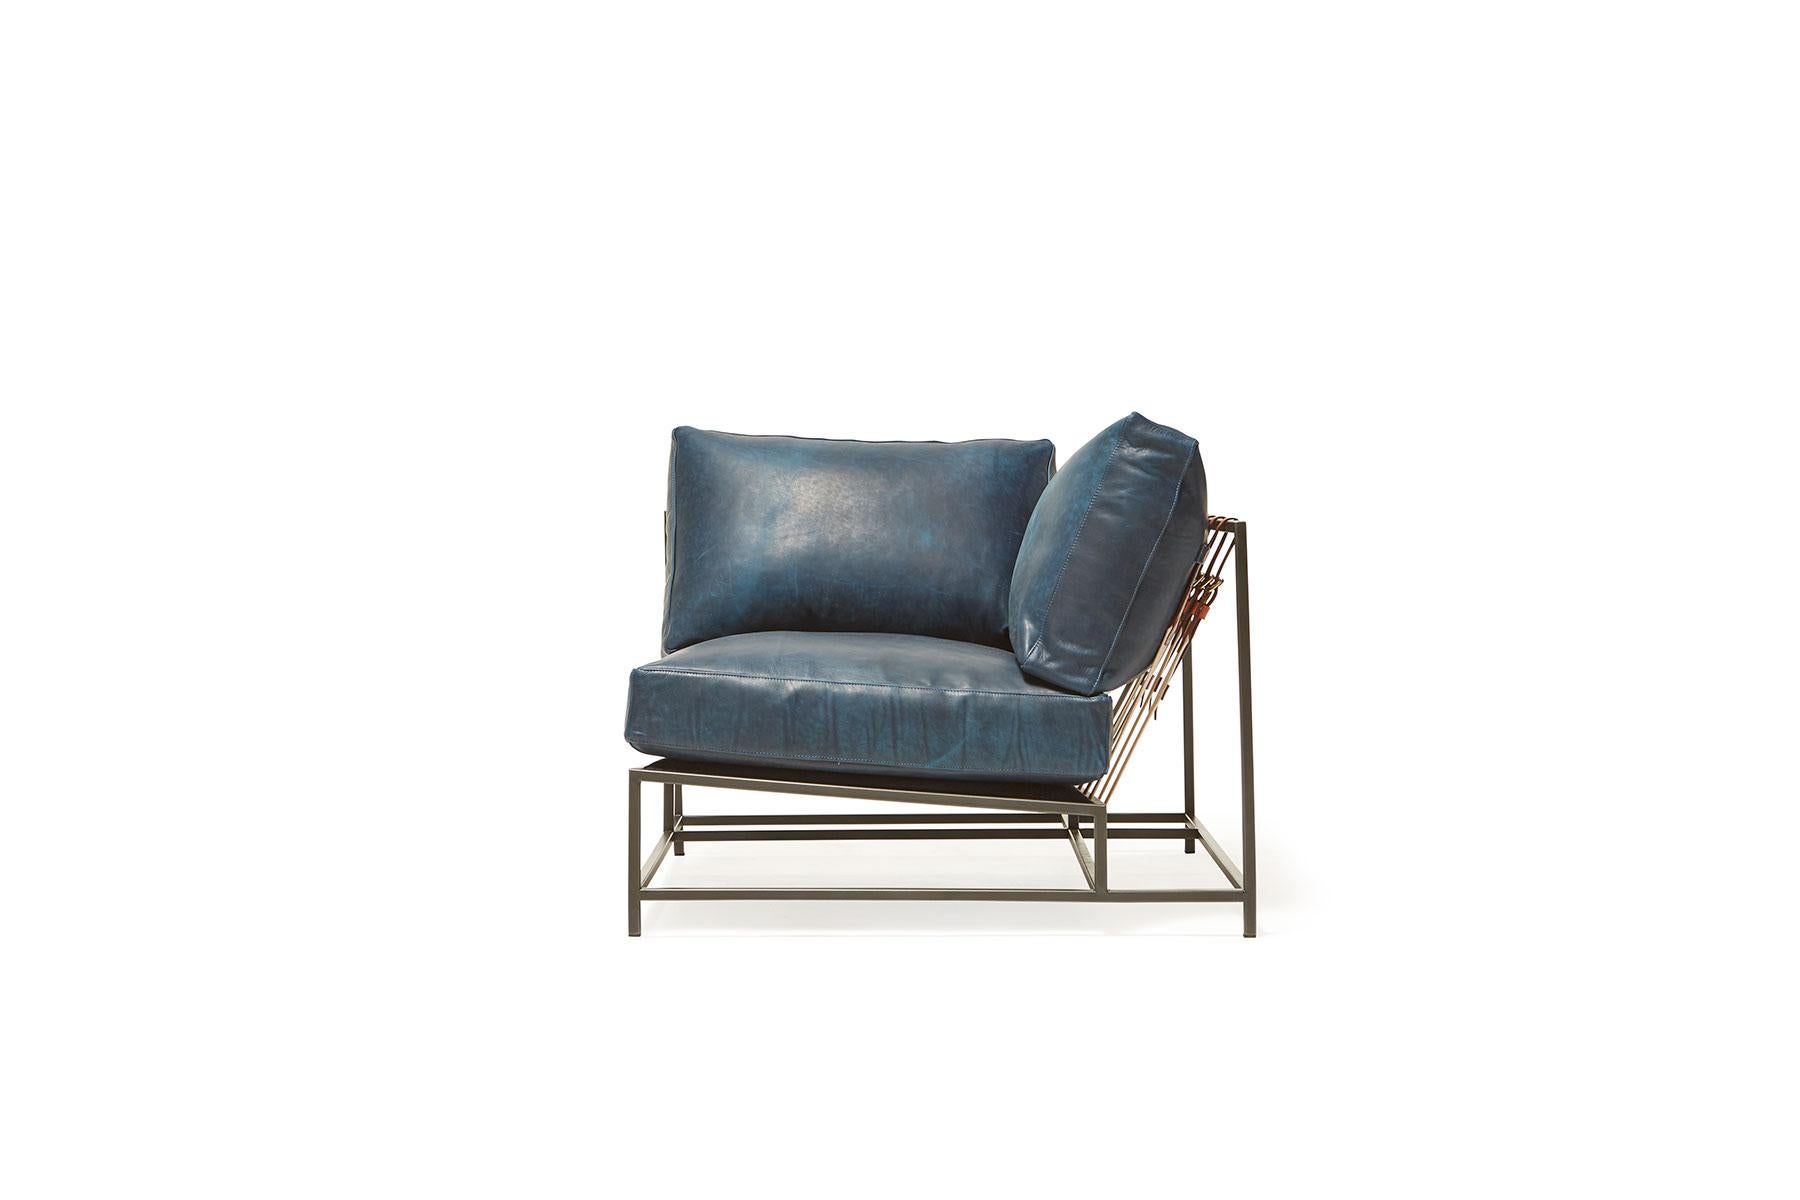 The Inheritance Corner chair can be used as a standalone piece, or as part of a modular sectional with other Inheritance pieces. 

This variation is upholstered in Brentwood Navy leather by Moore & Giles. The foam seat cushions have been wrapped